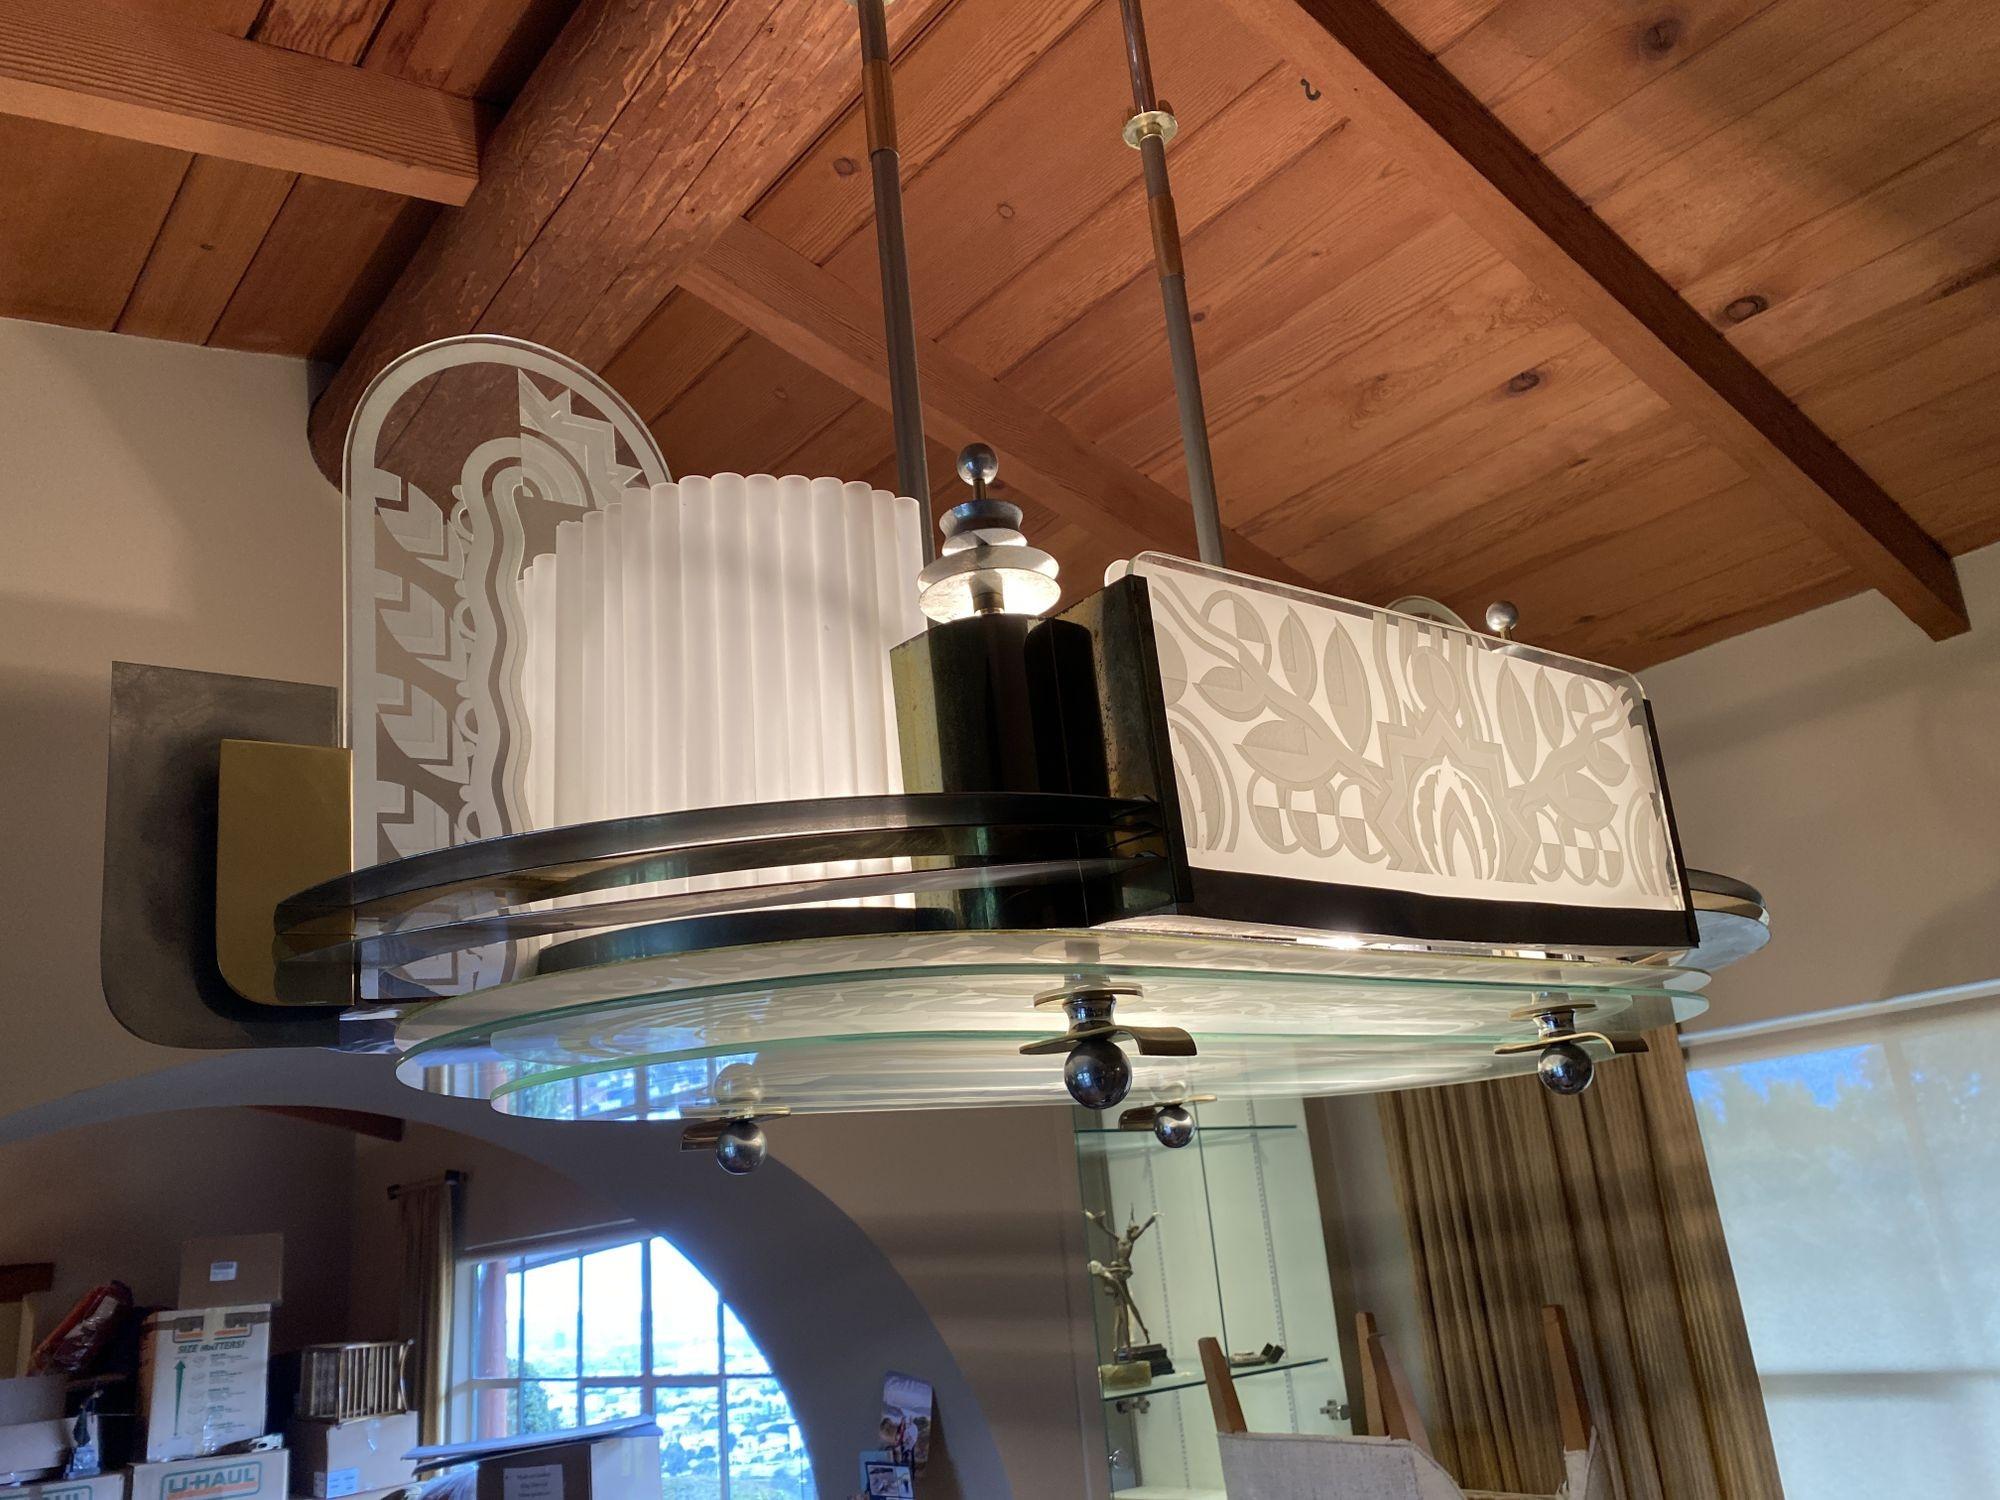 Original 1931 Art Deco cut and blasted glass and chrome steel geometric chandelier with highlights of Brass that was taken from the exclusive basement lounge of the famous Wiltern Theater in Los Angeles during renovations in 1985. 
 
The